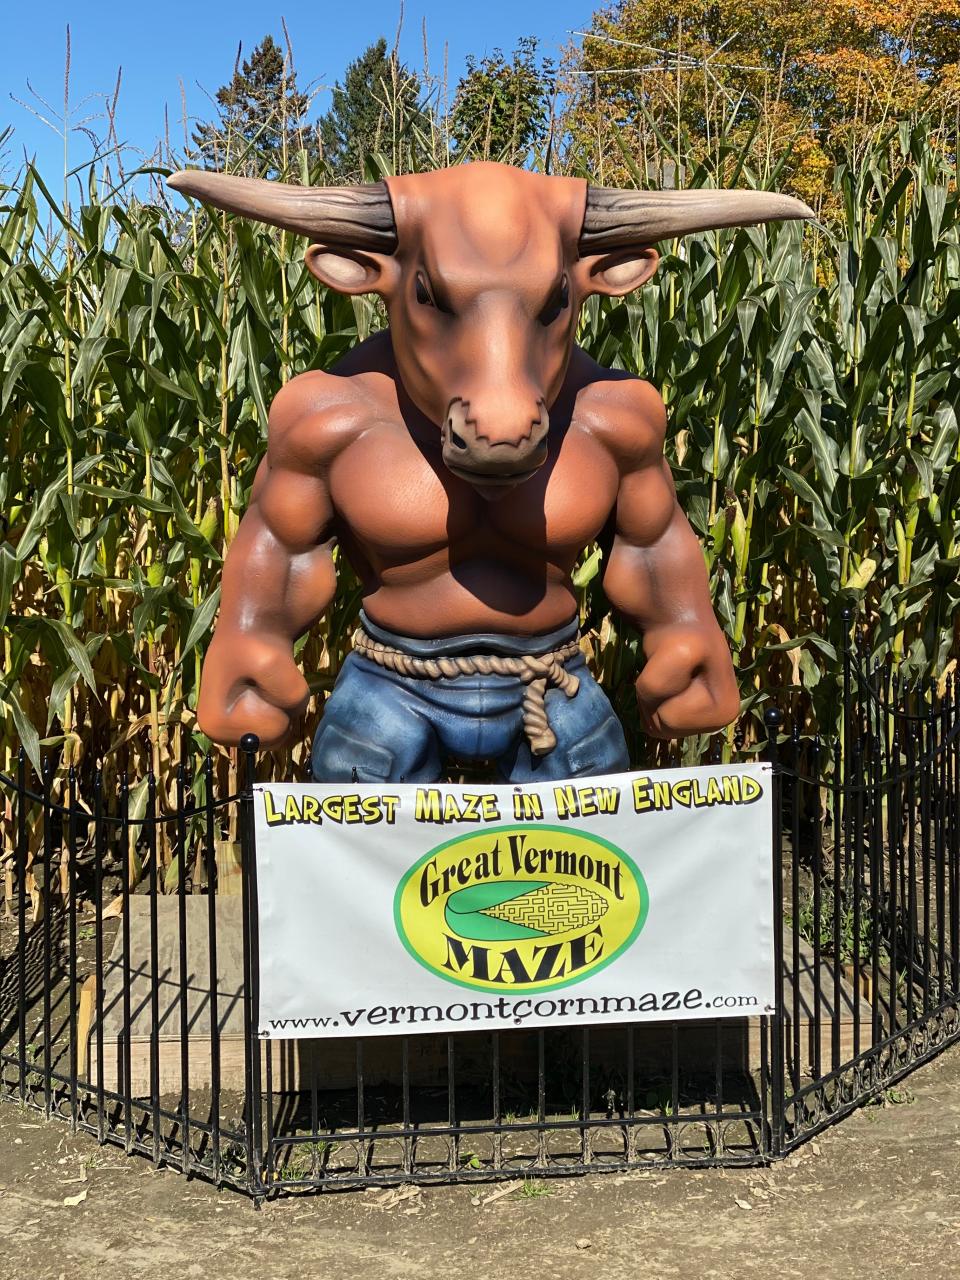 Not just in Greek myth or relegated to a labyrinth, a minotaur inhabits the Great Vermont Corn Maze in Danville on Oct. 5, 2019.